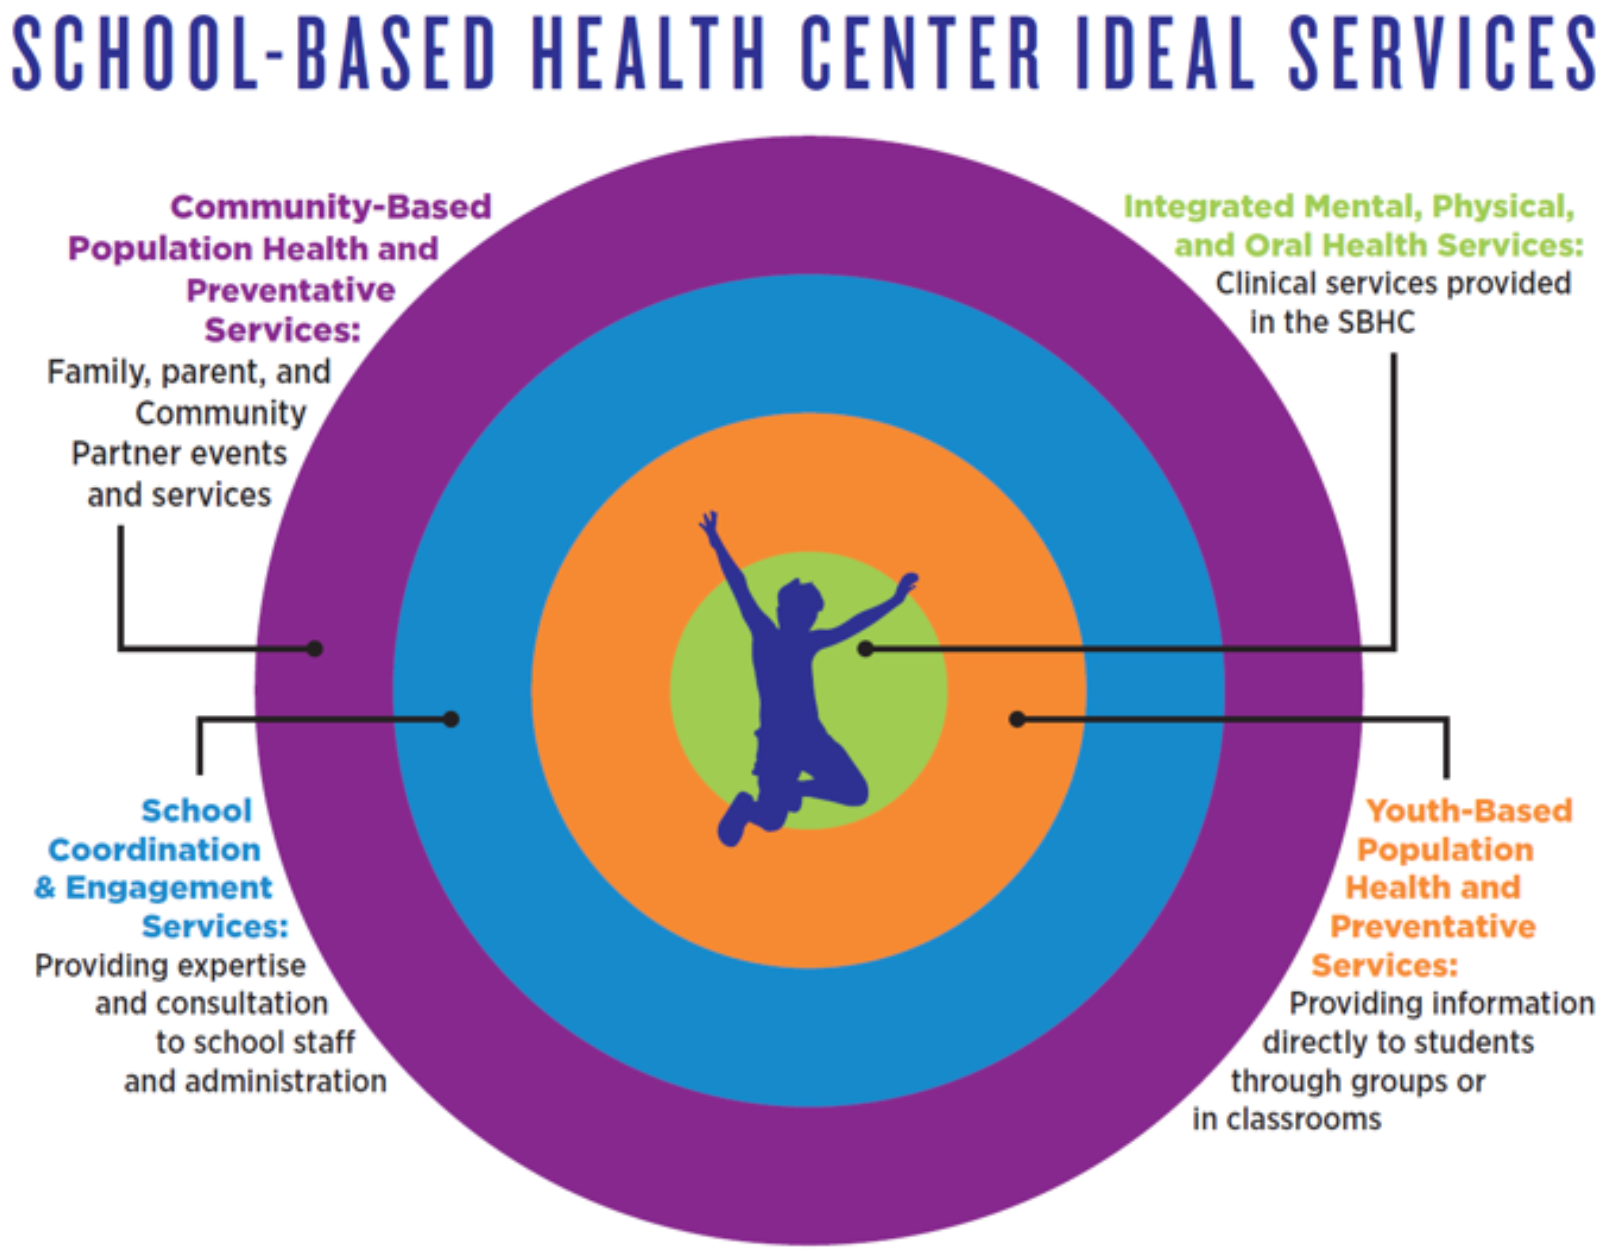 Graphic with the header, school-based health center ideal services.  In the middle are three circles, purple, blue and orange, with a blue silhouette in the middle, jumping in the air.  One line is pointing to the outer purple circle with text "Community-Based Population Health and Preventative Services:  Family, parent, and Community Partner events and services.  One line is pointing to the blue circle with text, school, coordination and engagement services, providing expertise and consultation to school staff and administration.  One line is pointing to the orange circle with taxed youth based population health and preventative services providing information directly to students through groups or in classrooms.  One line is pointing to the middle with text Integrated Mental, Physical, and Oral Health Services:  Clinical services provided in the SBHC.